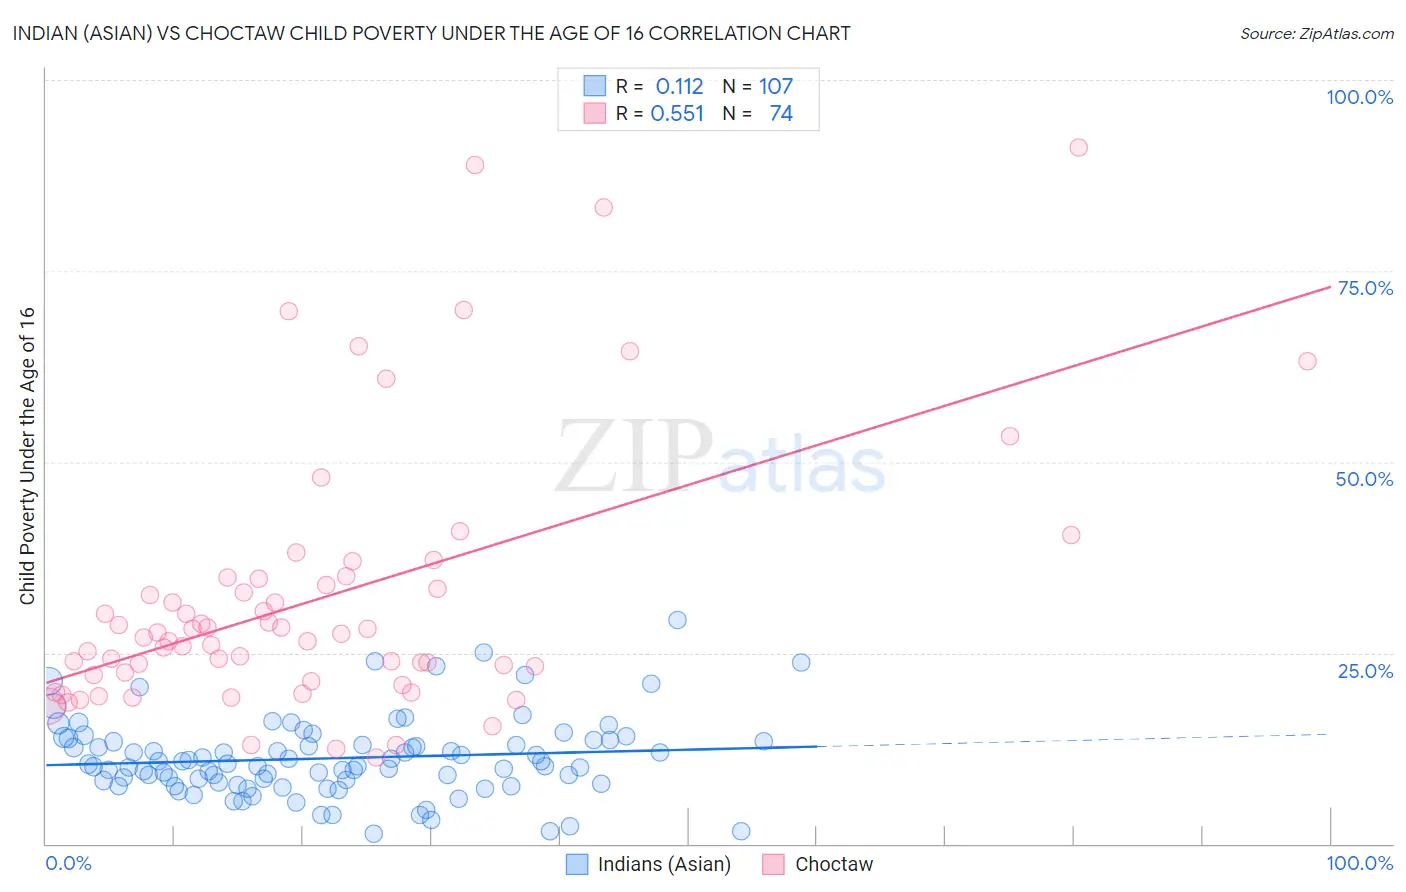 Indian (Asian) vs Choctaw Child Poverty Under the Age of 16